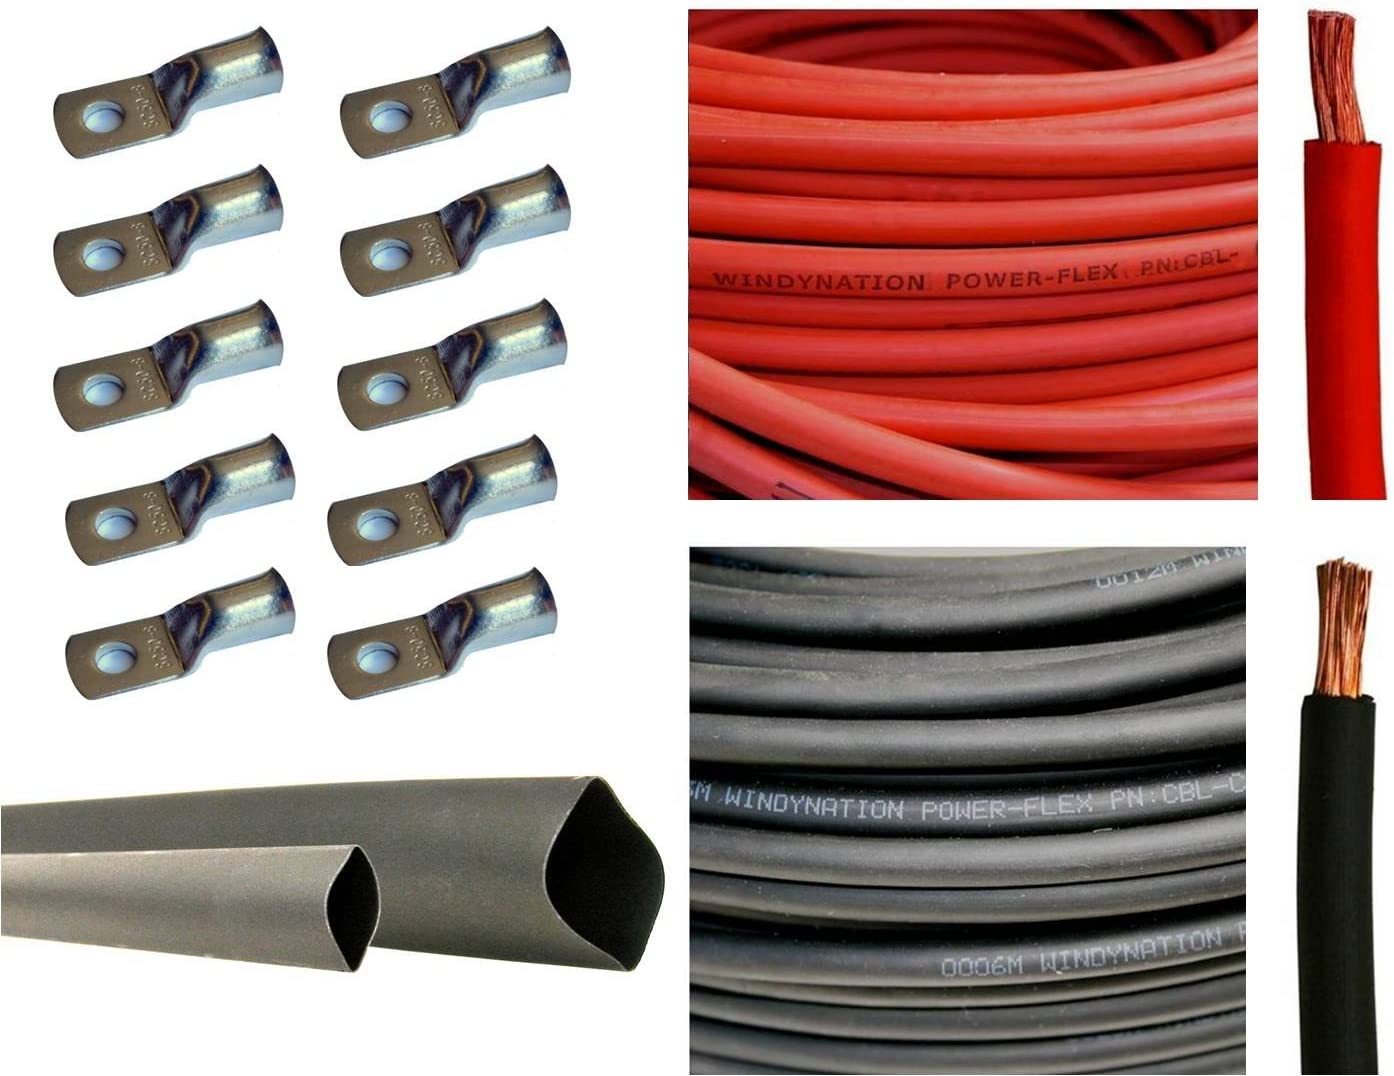 Automotive Battery Cable - 2 GAUGE TINNED BATTERY POWER LEAD - RED, Black -  High Quality industrial Cable Supplier